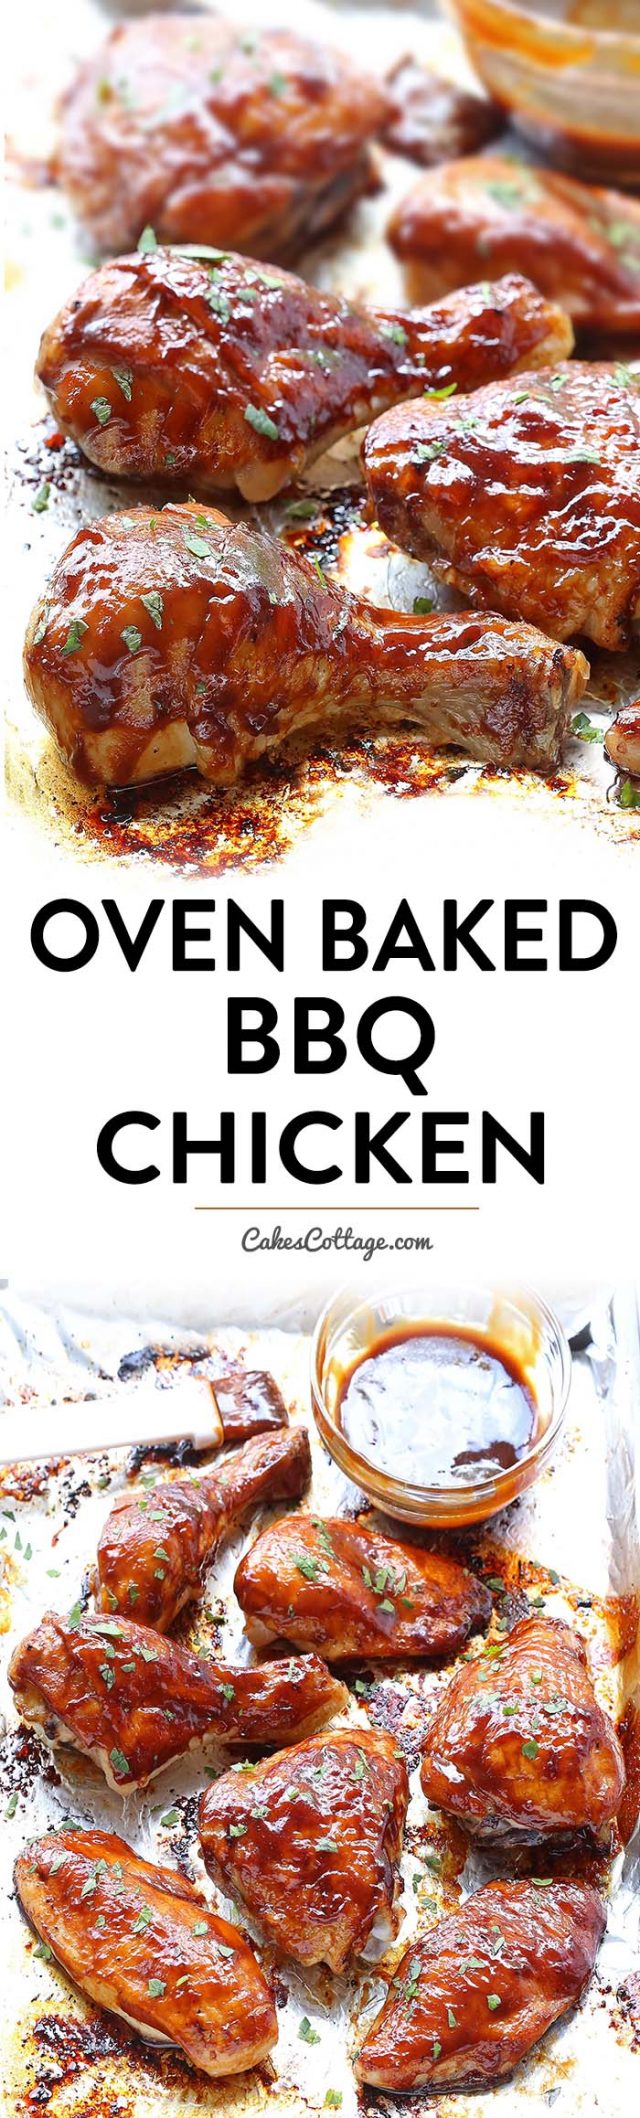 This is one of the juiciest oven baked BBQ chicken you'll ever taste.